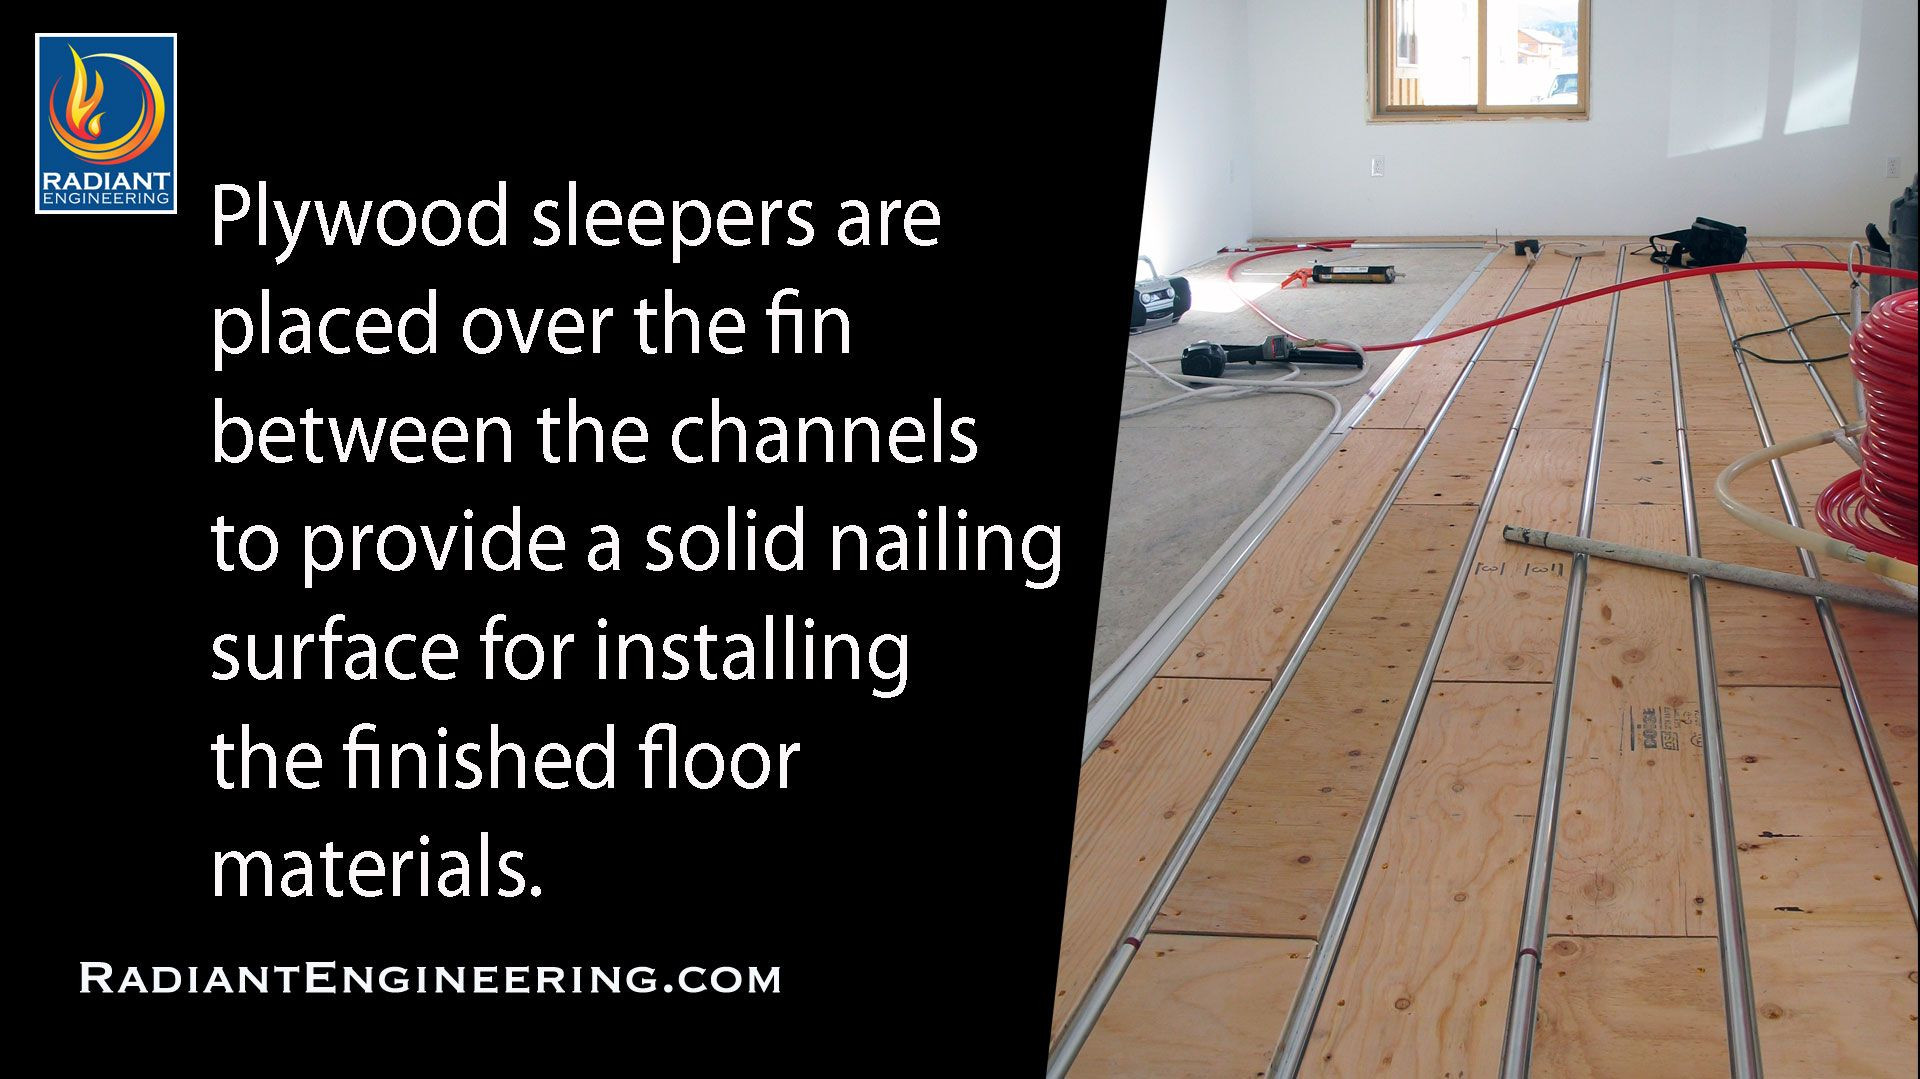 how to install hardwood floors on cement slab of radiant heated floor installation with thermofin u and pex tubing within radiant heated floor installation with thermofin u and pex tubing ready for installation of wood